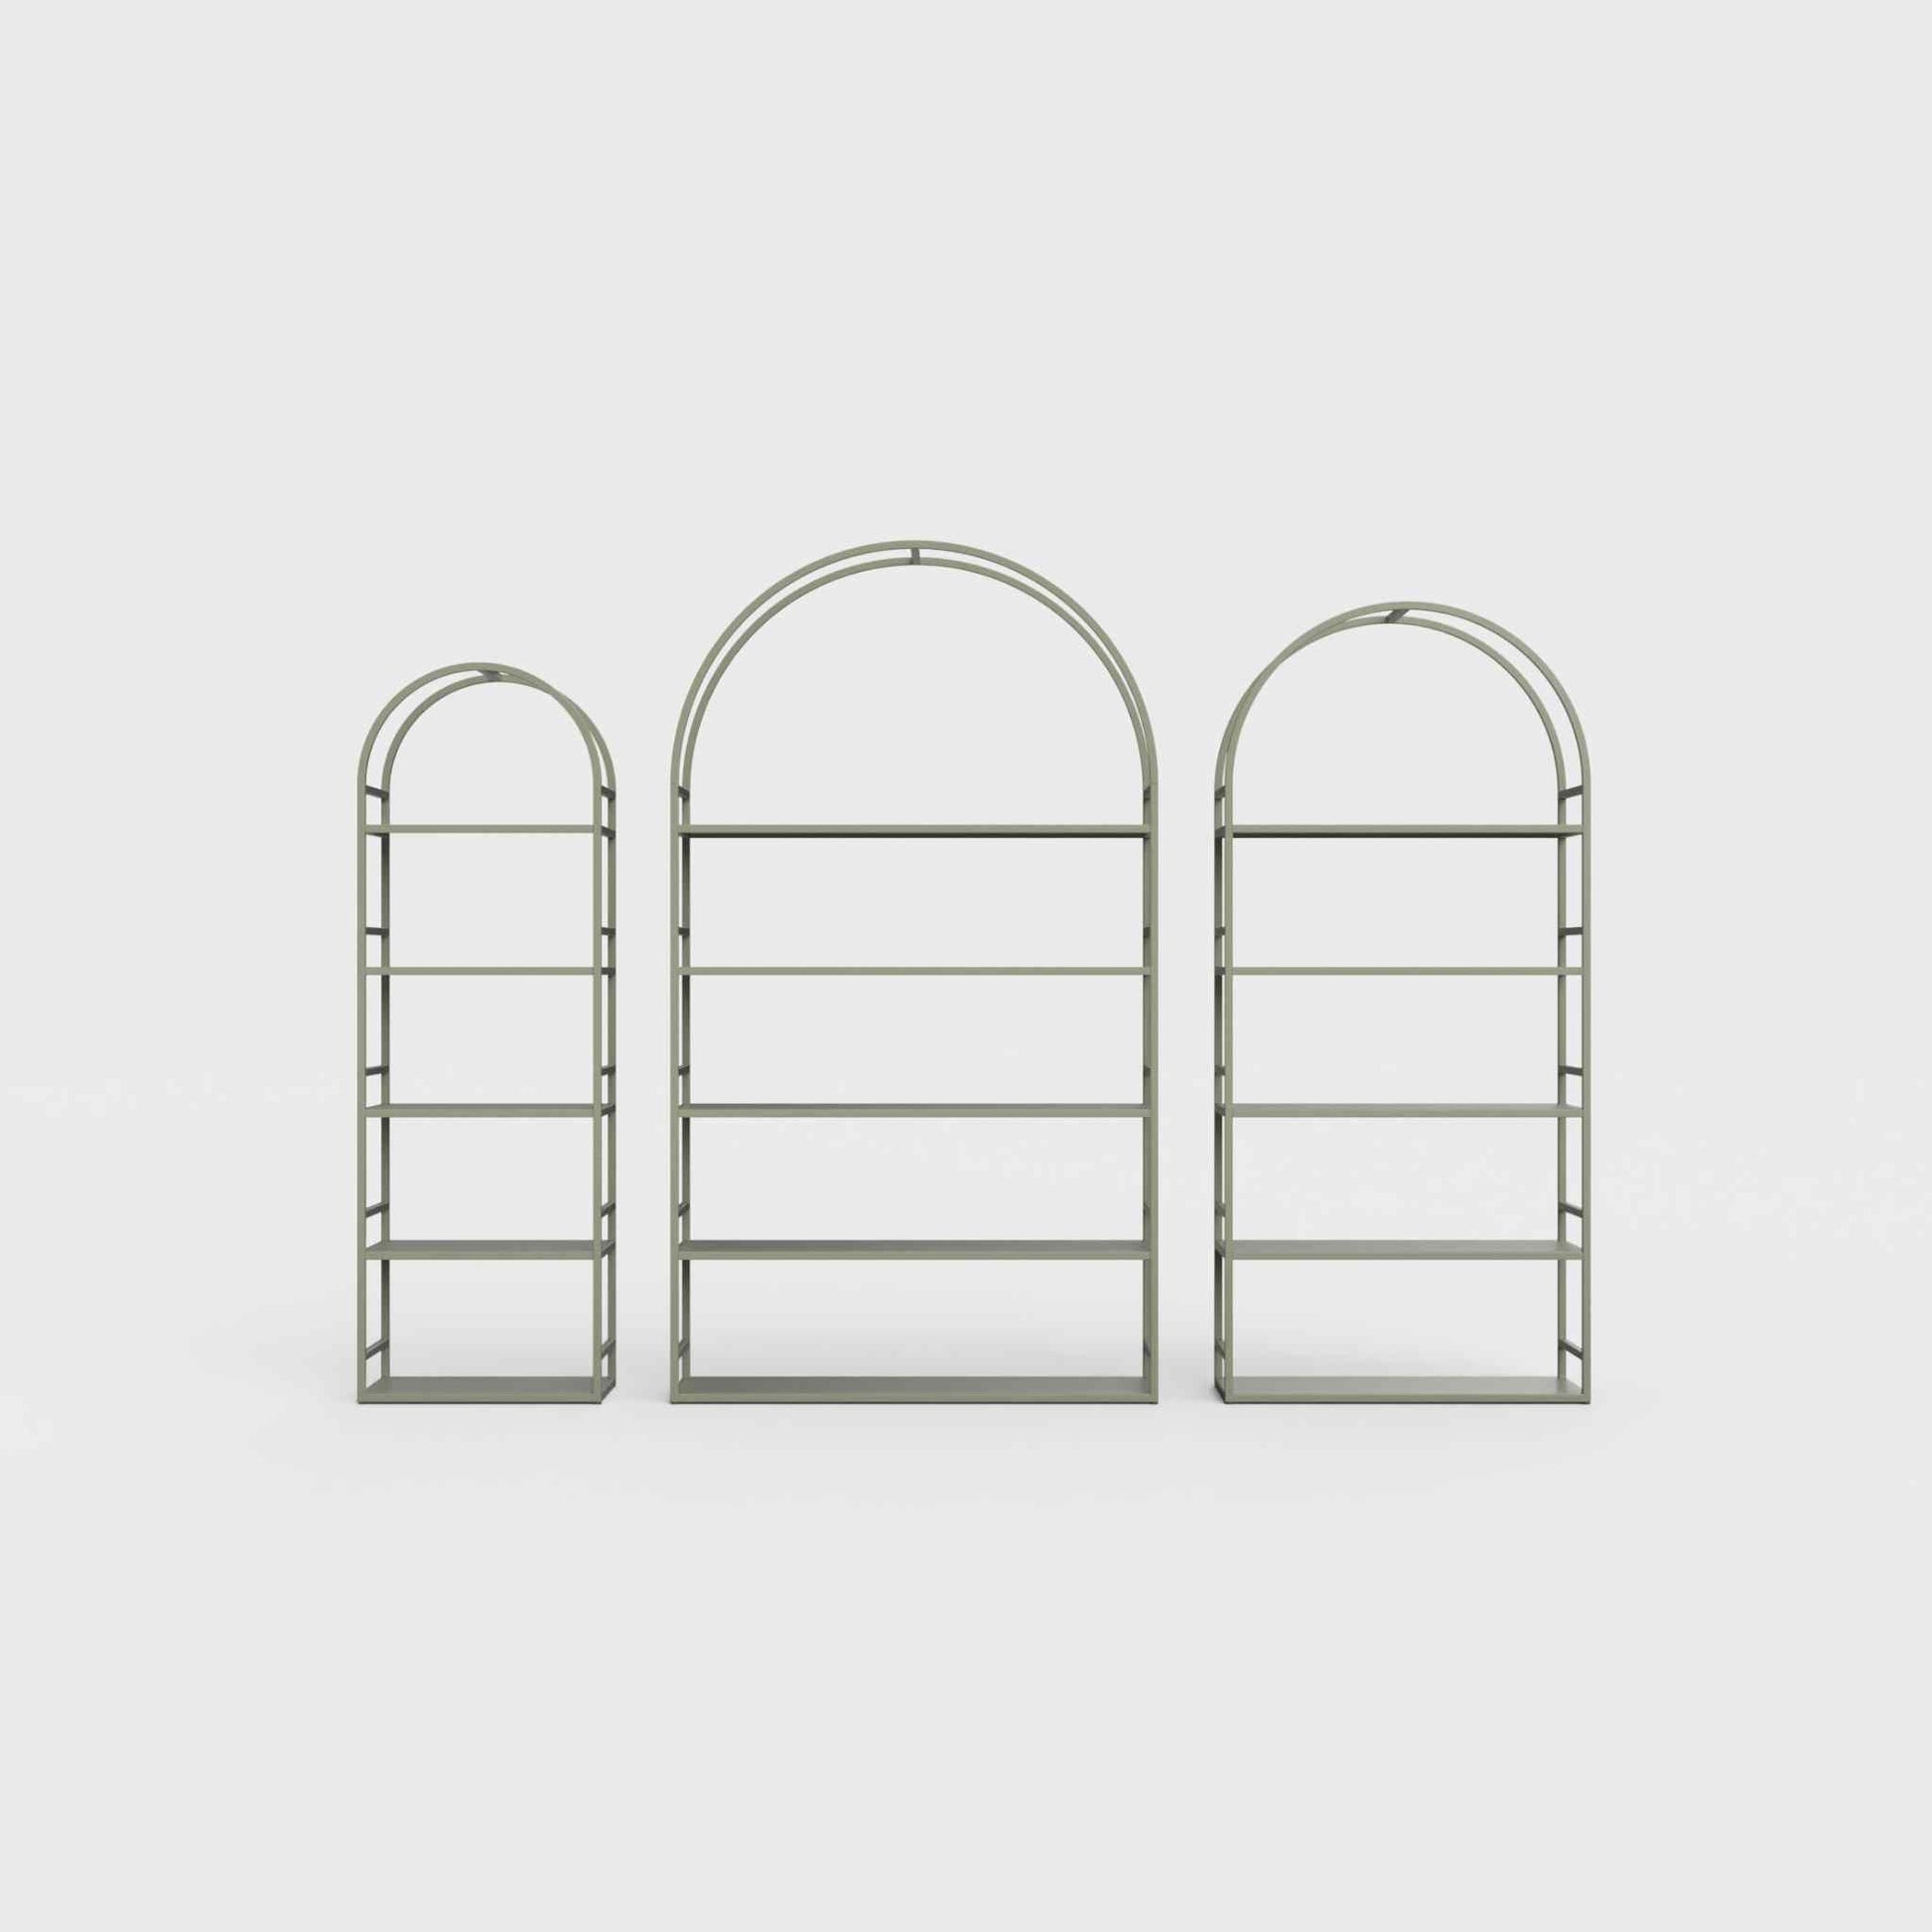 Arched bookcase Arkada, available in Switzerland through ÉTAUDORÉ, made from highest quality powdered coated steel in faded olive color